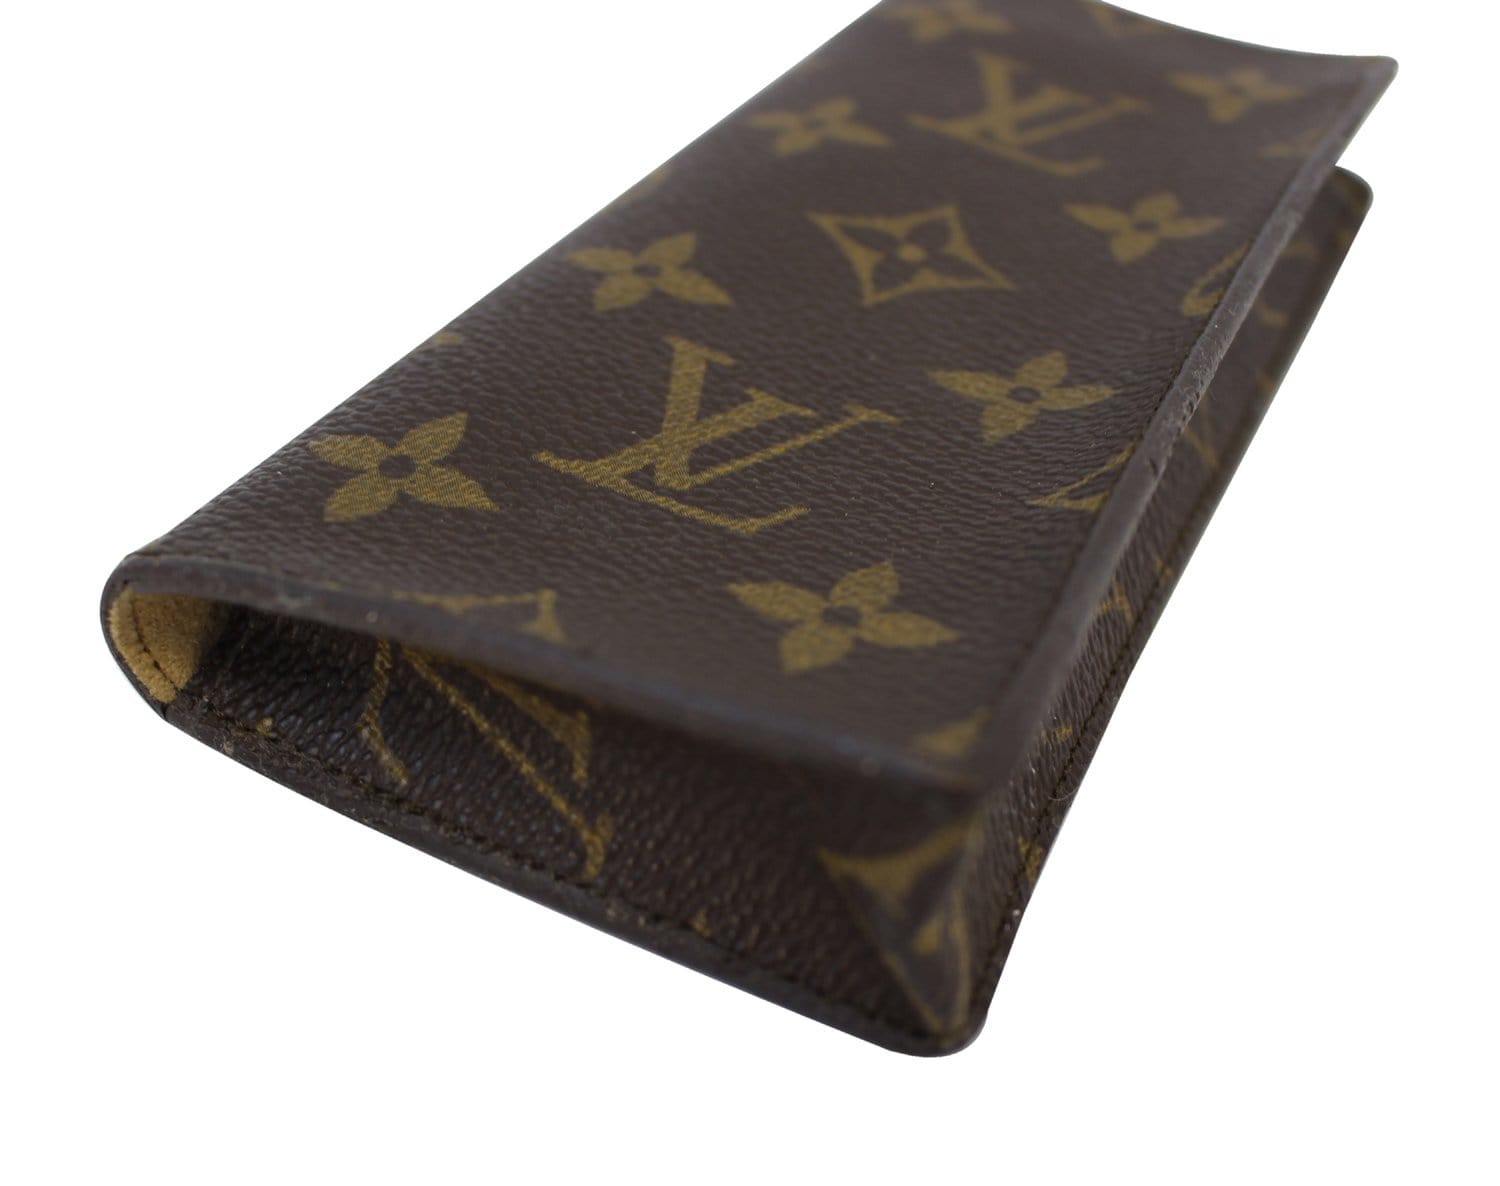 LVxNBA Woody Glasses Case Monogram Canvas - Highlights and Gifts